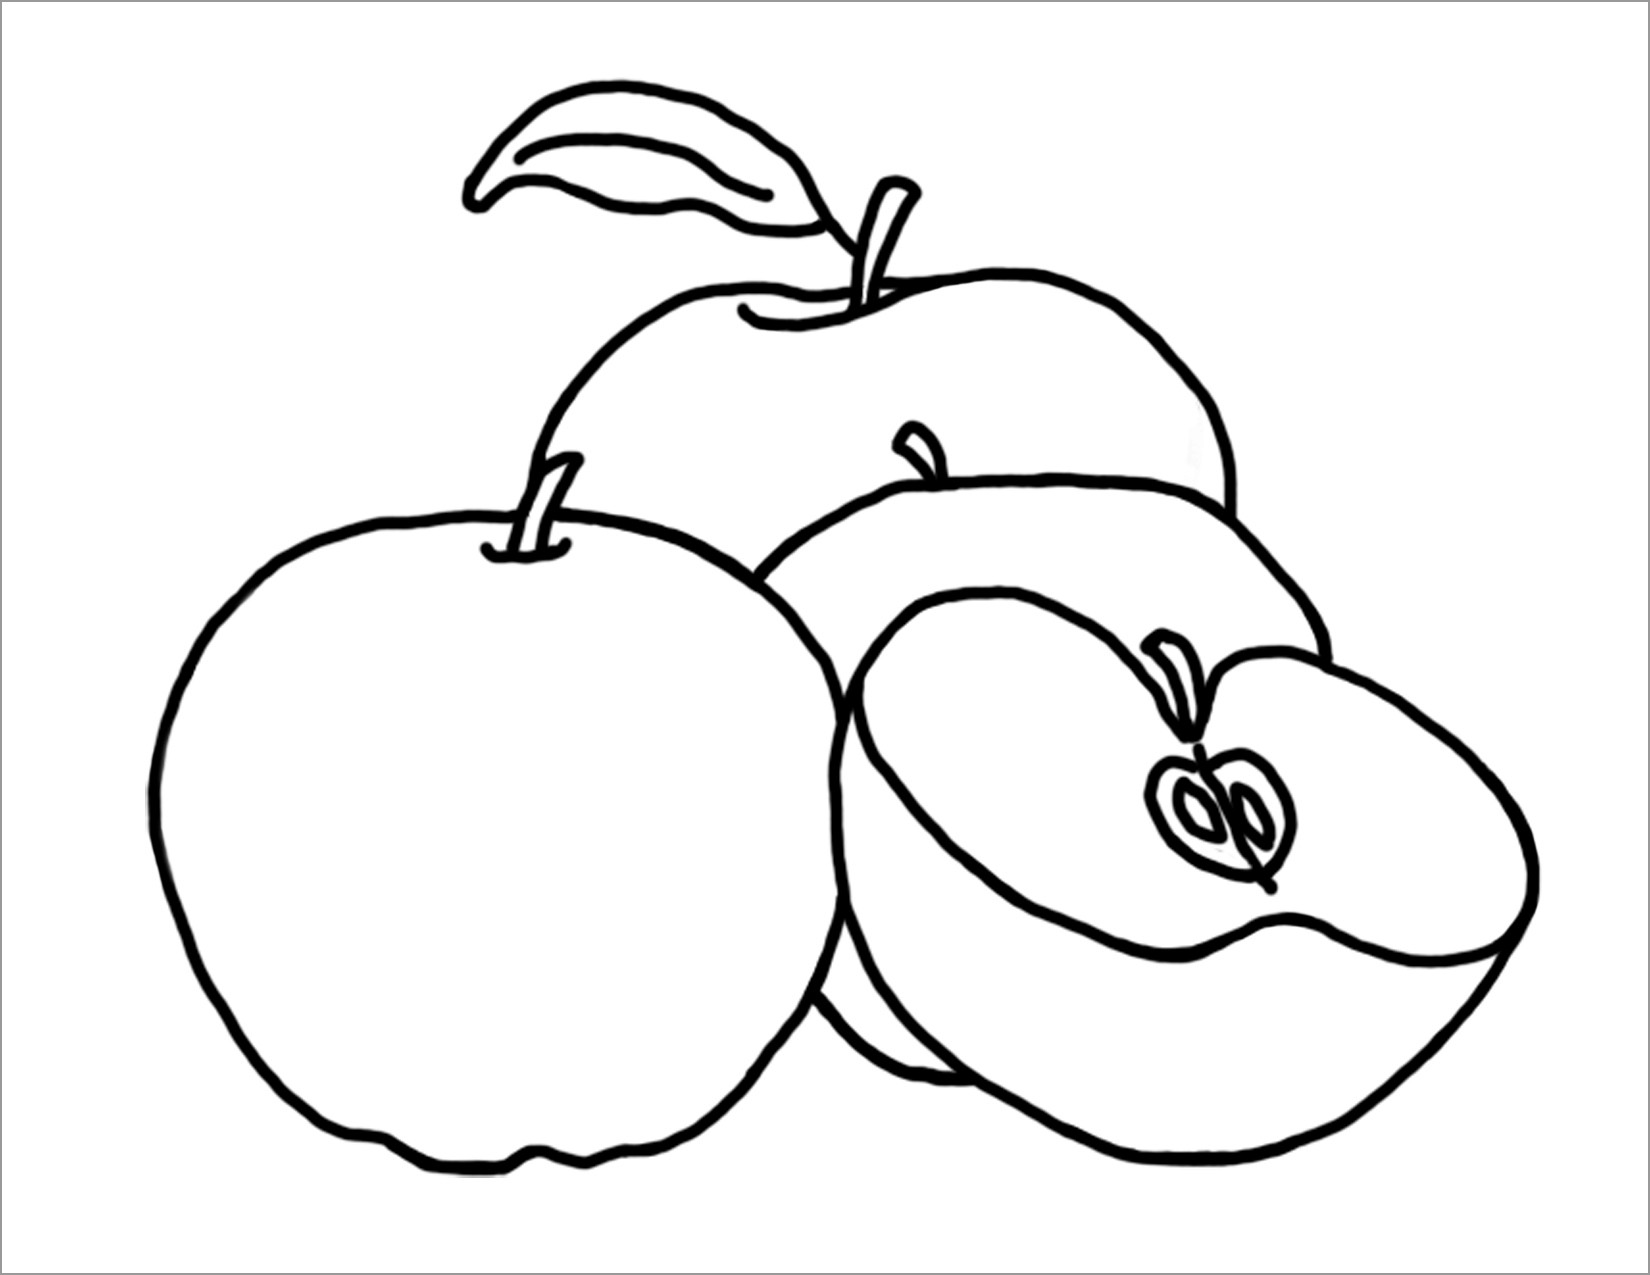 Free Printable Apple Coloring Pages for Kids   ColoringBay